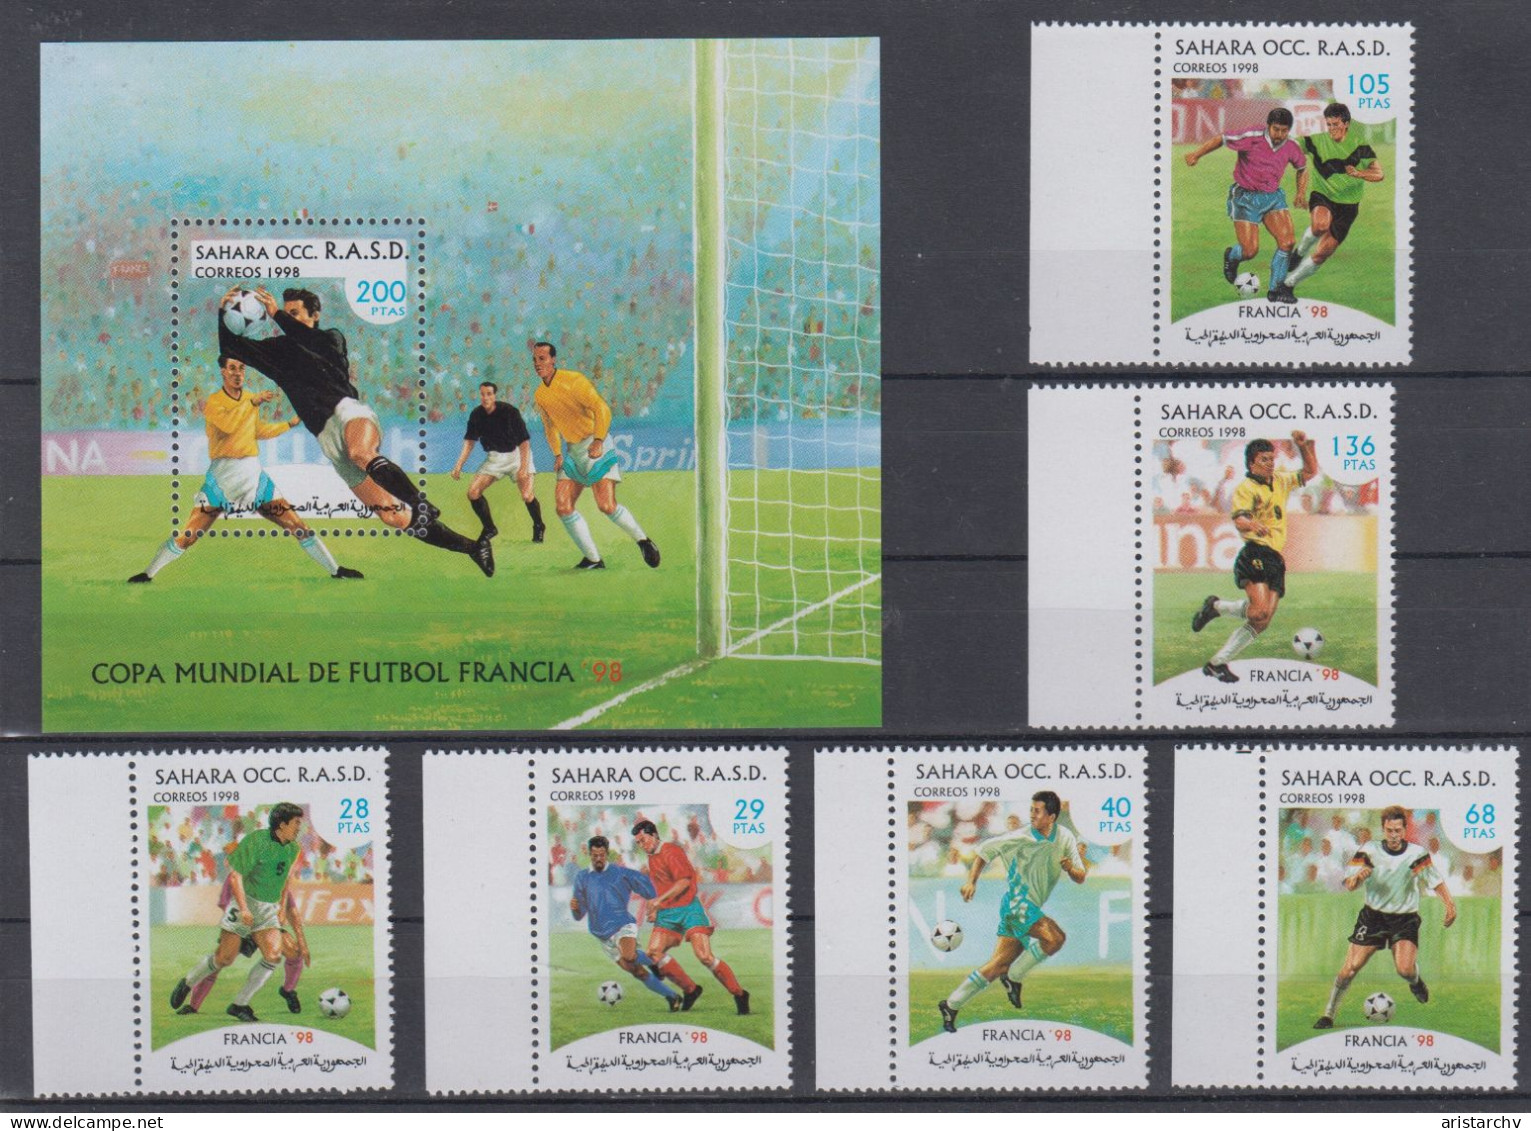 SAHARA OCC 1998 FOOTBALL WORLD CUP S/SHEET AND 6 STAMPS - 1998 – Francia